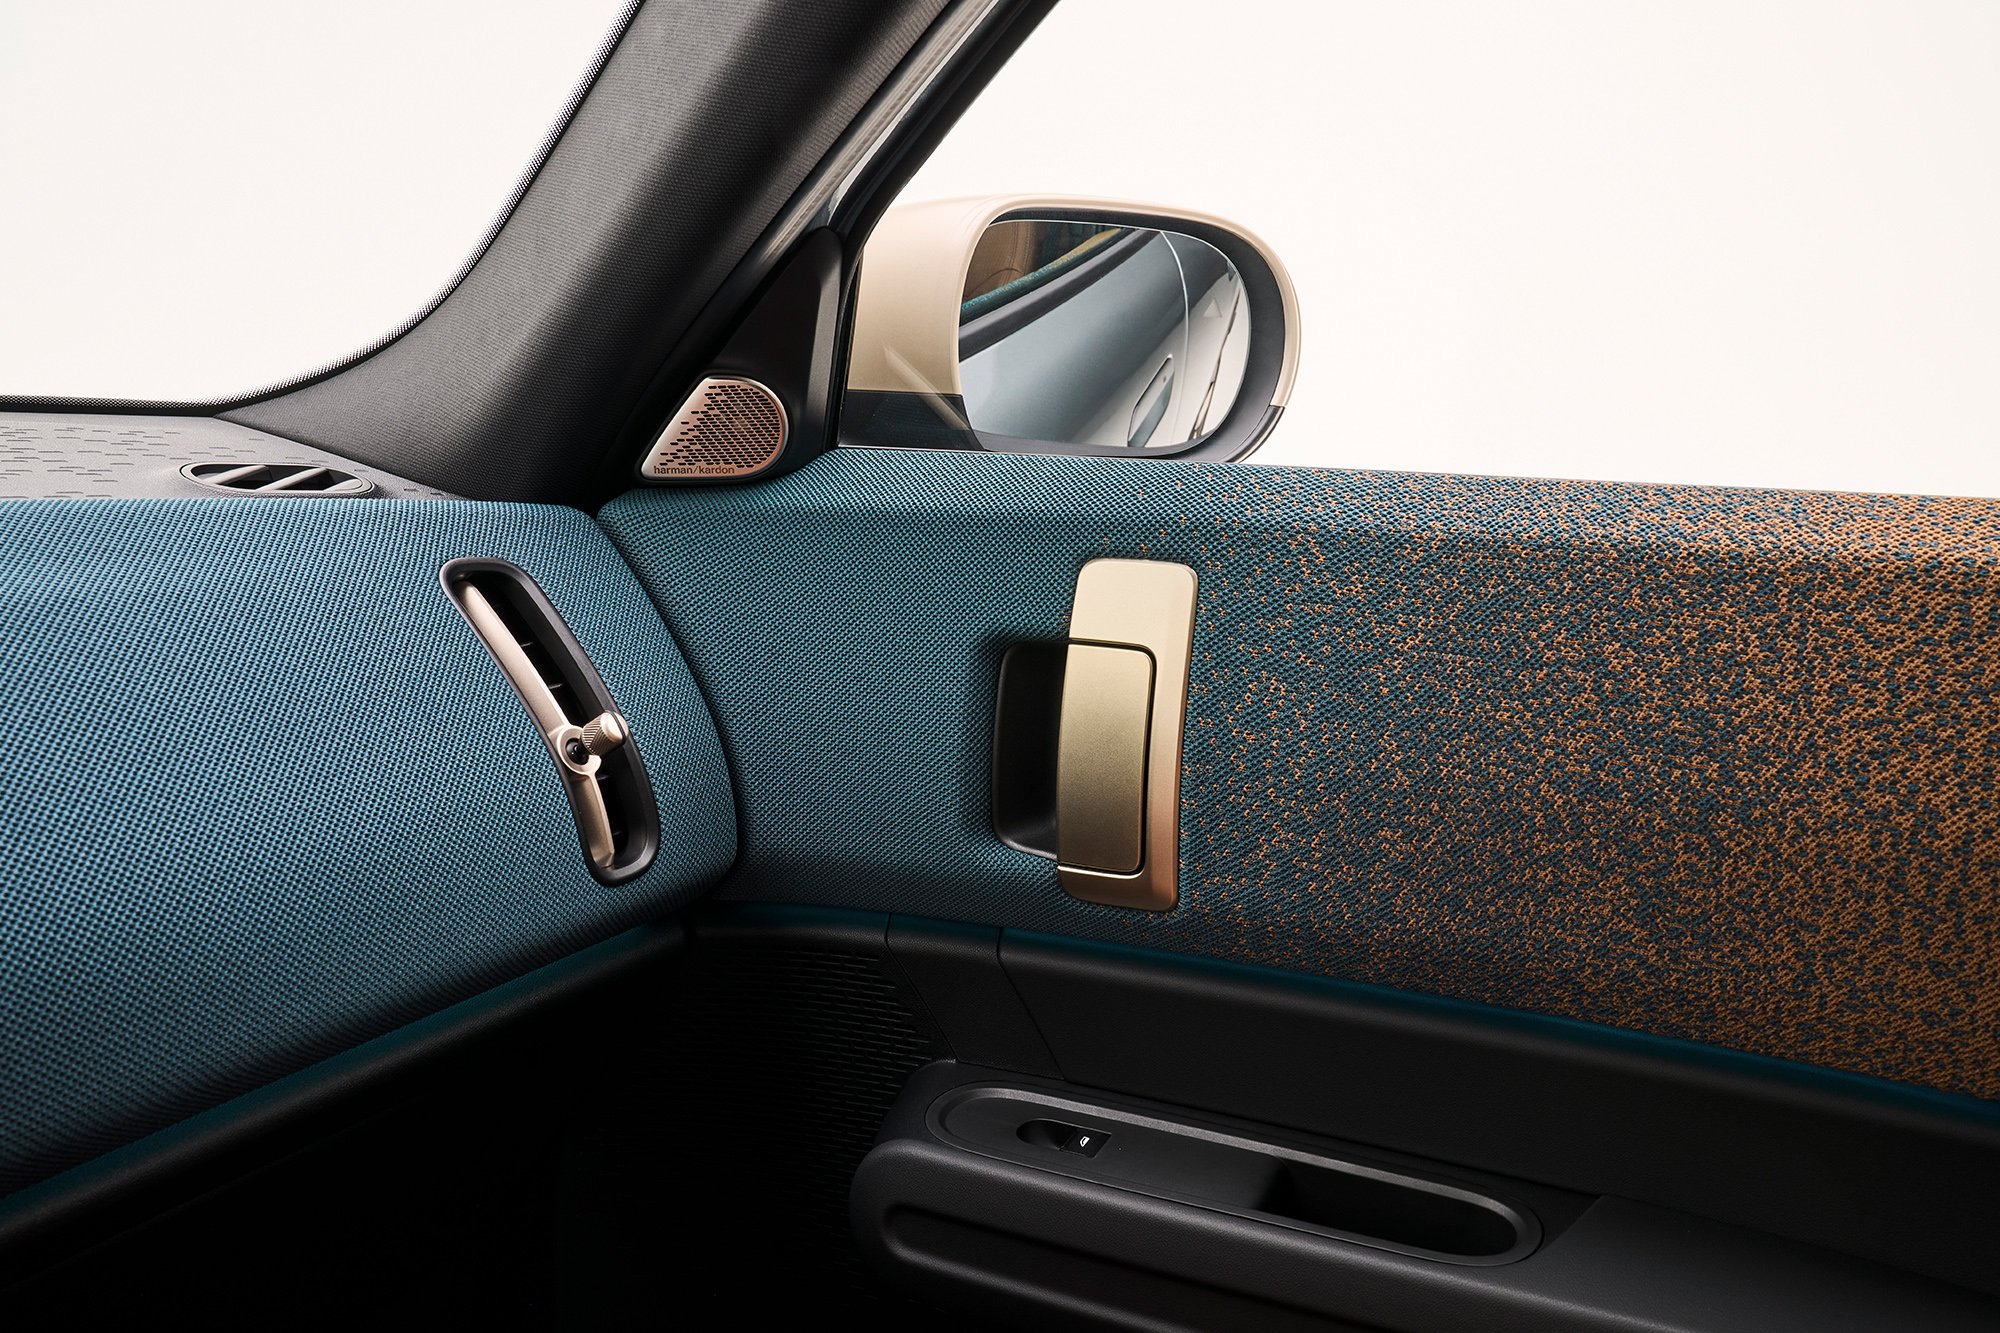 The interior and textile design of the new all-electric MINI Countryman